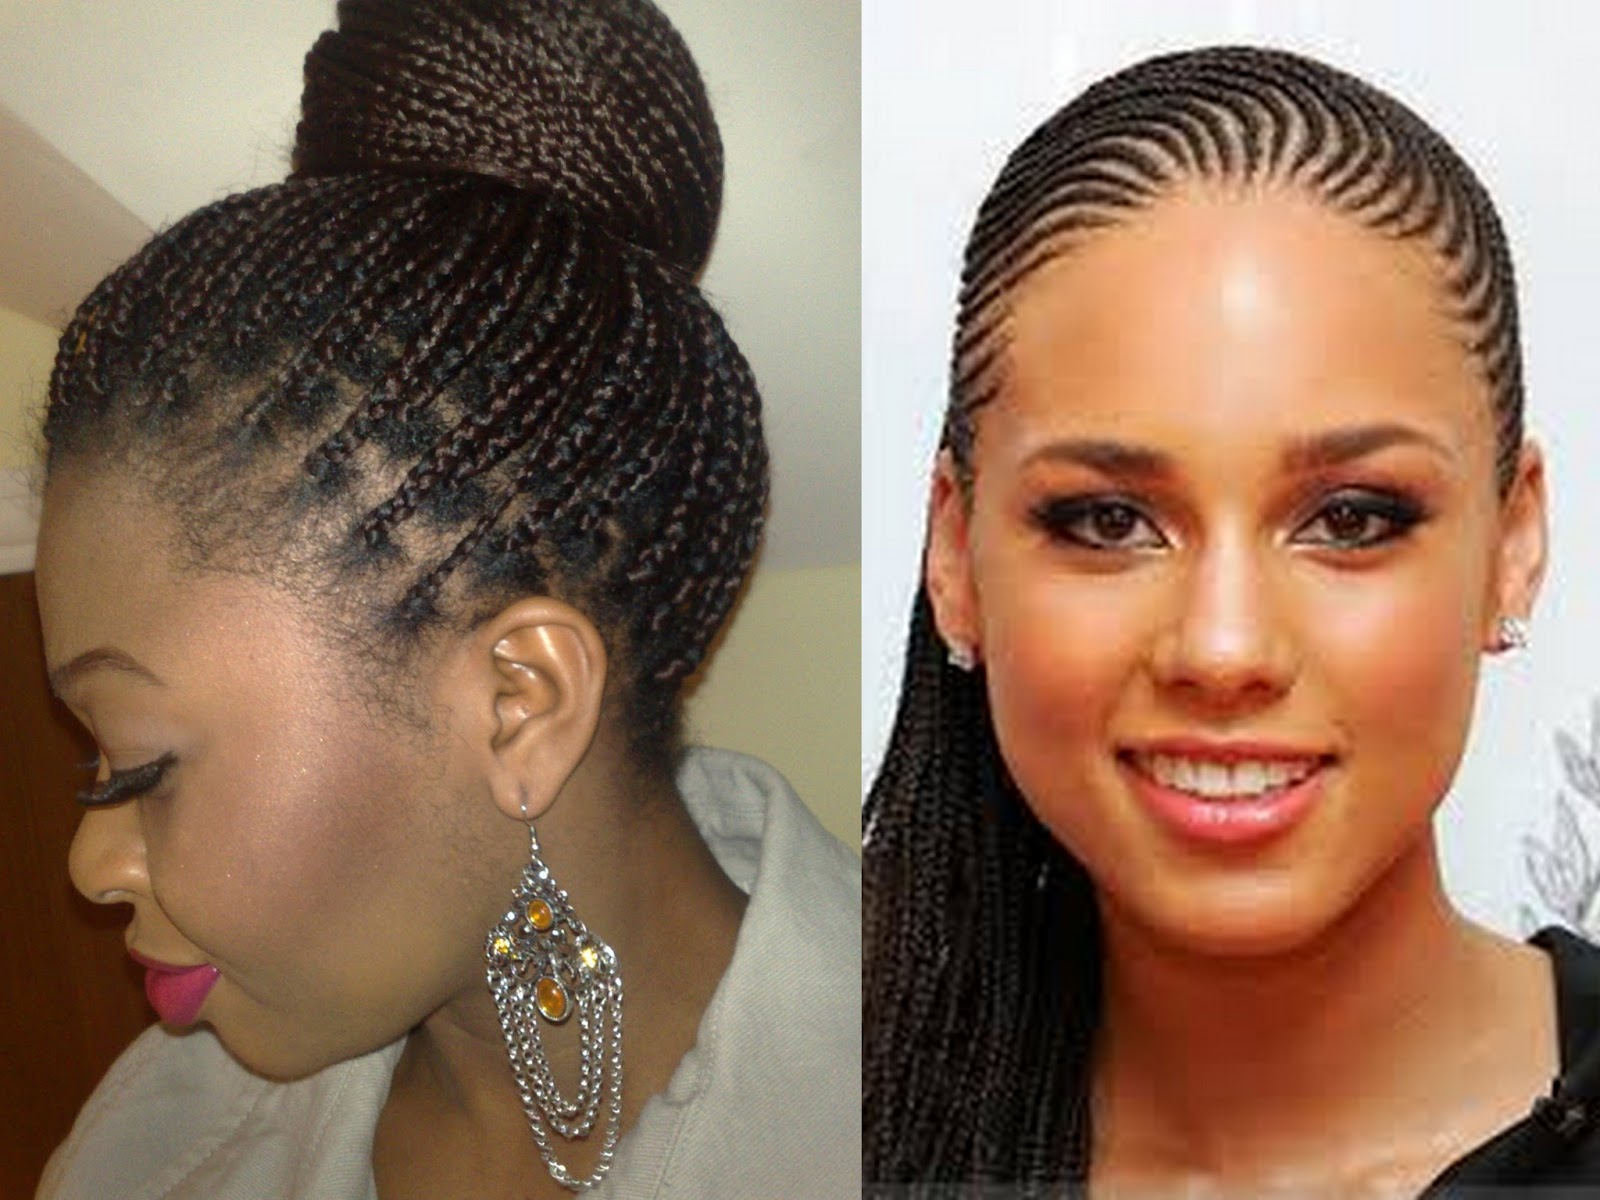 Black Women Hairstyles Ideas That You Can Make Yourself Beautiful With Small Touches 024